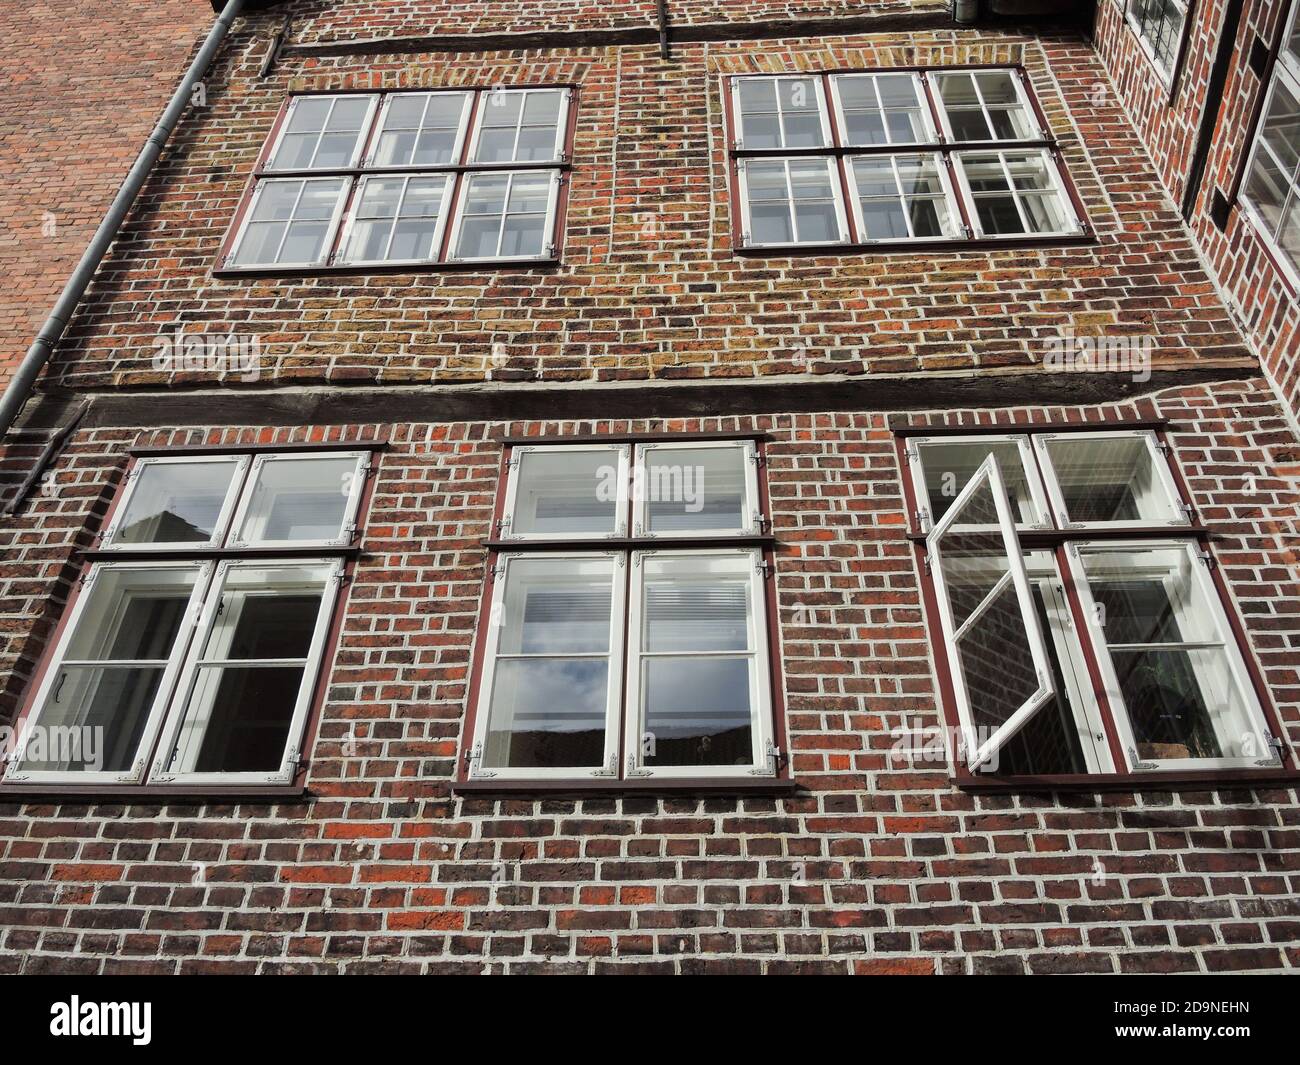 Low angle shot of an old brick house with lattice windows Stock Photo